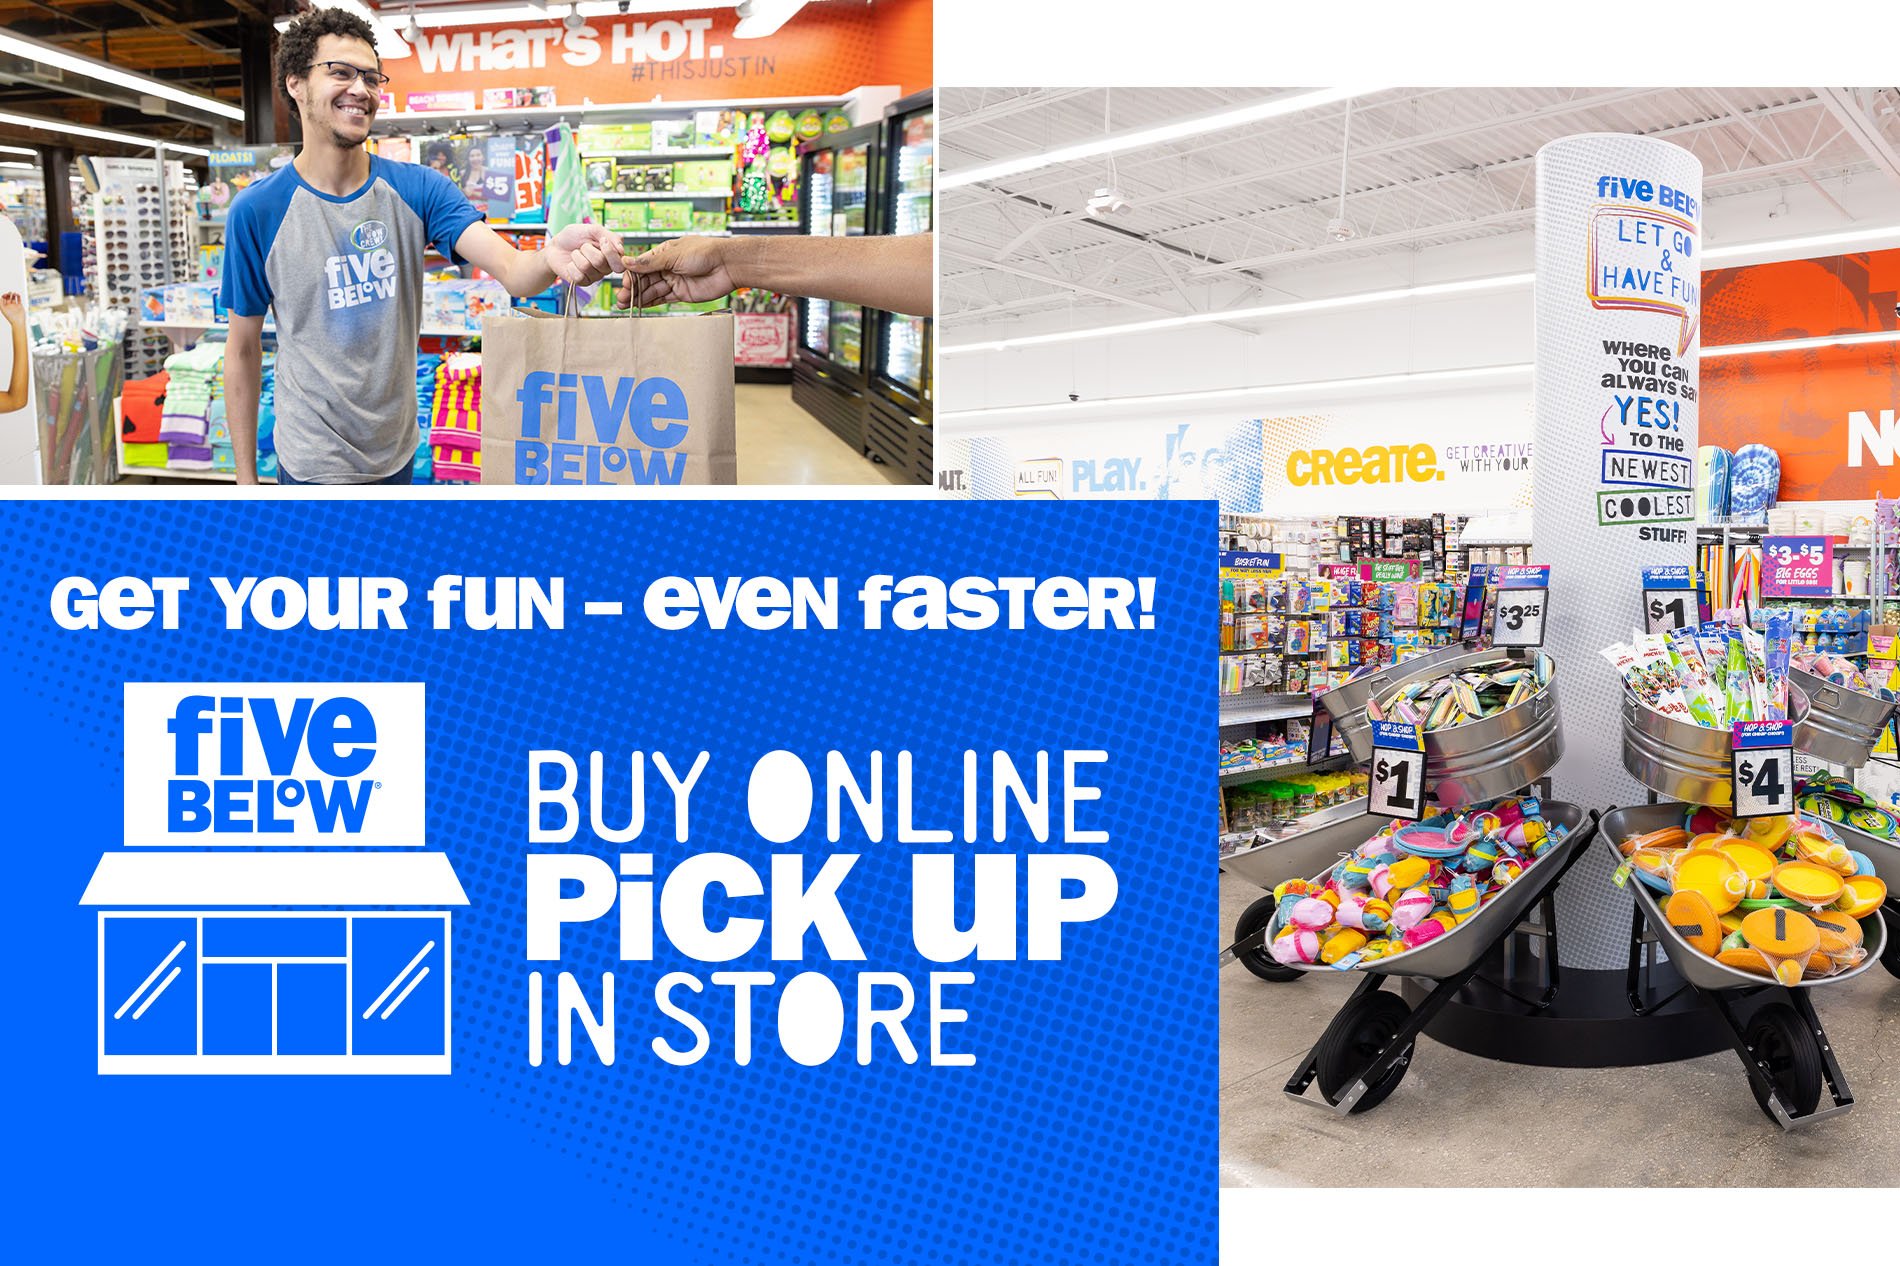 Find the nearest Five Below near you  Discount store, Novelty items, and  Games